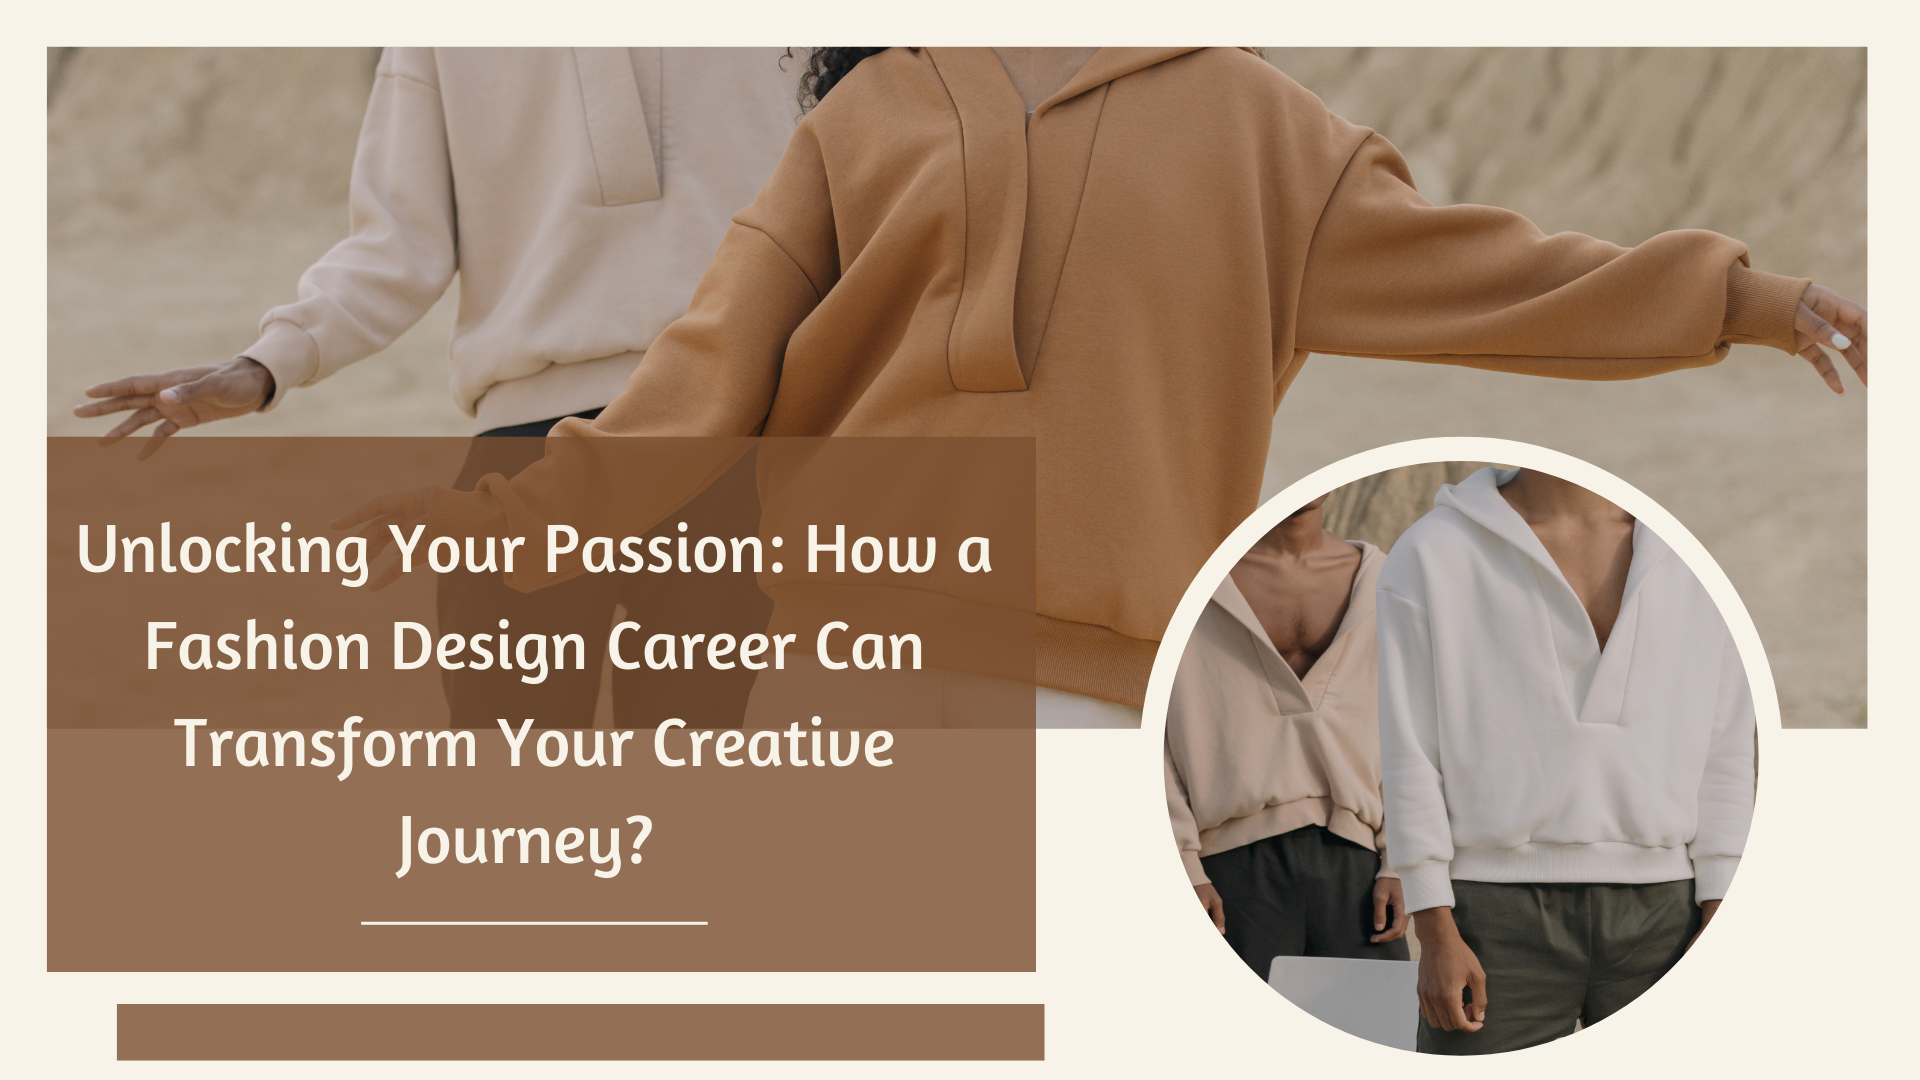 Unlocking Your Passion: How a Fashion Design Career Can Transform Your Creative Journey?